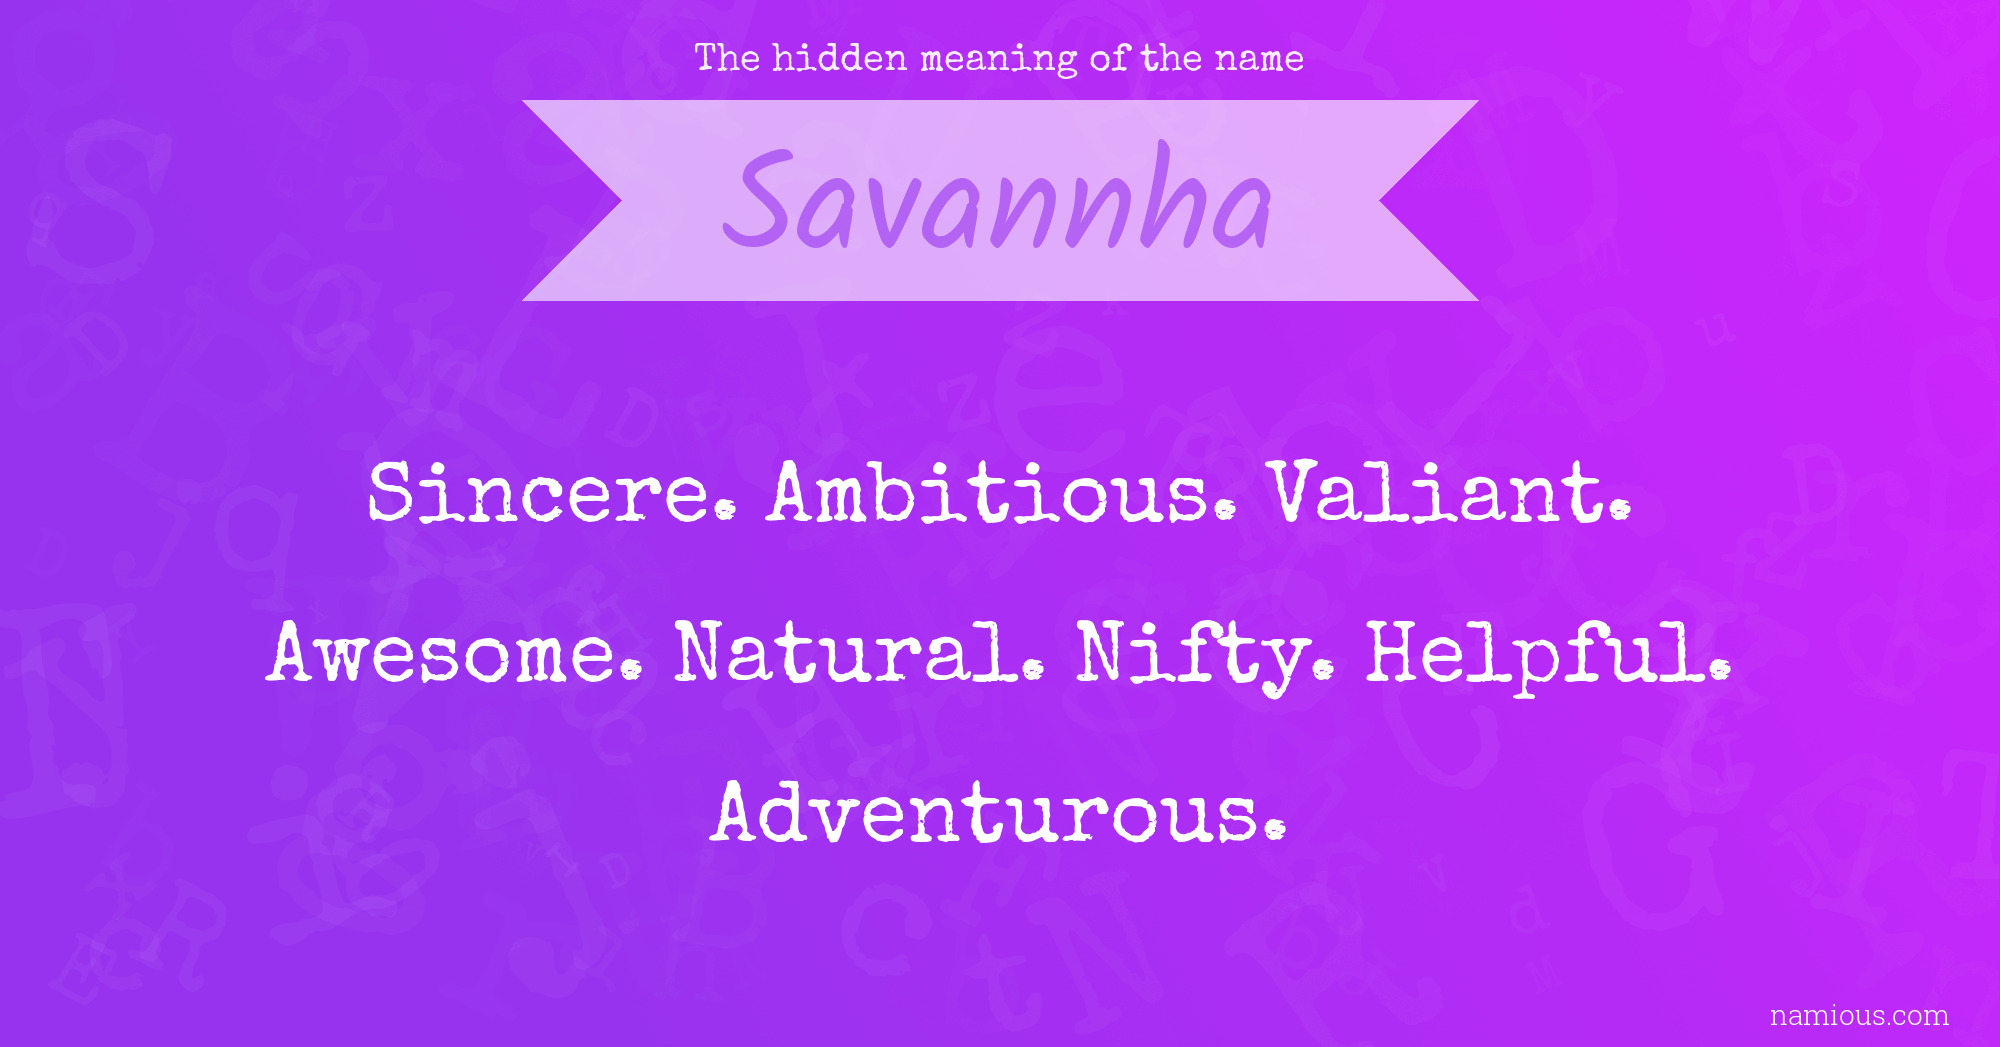 The hidden meaning of the name Savannha